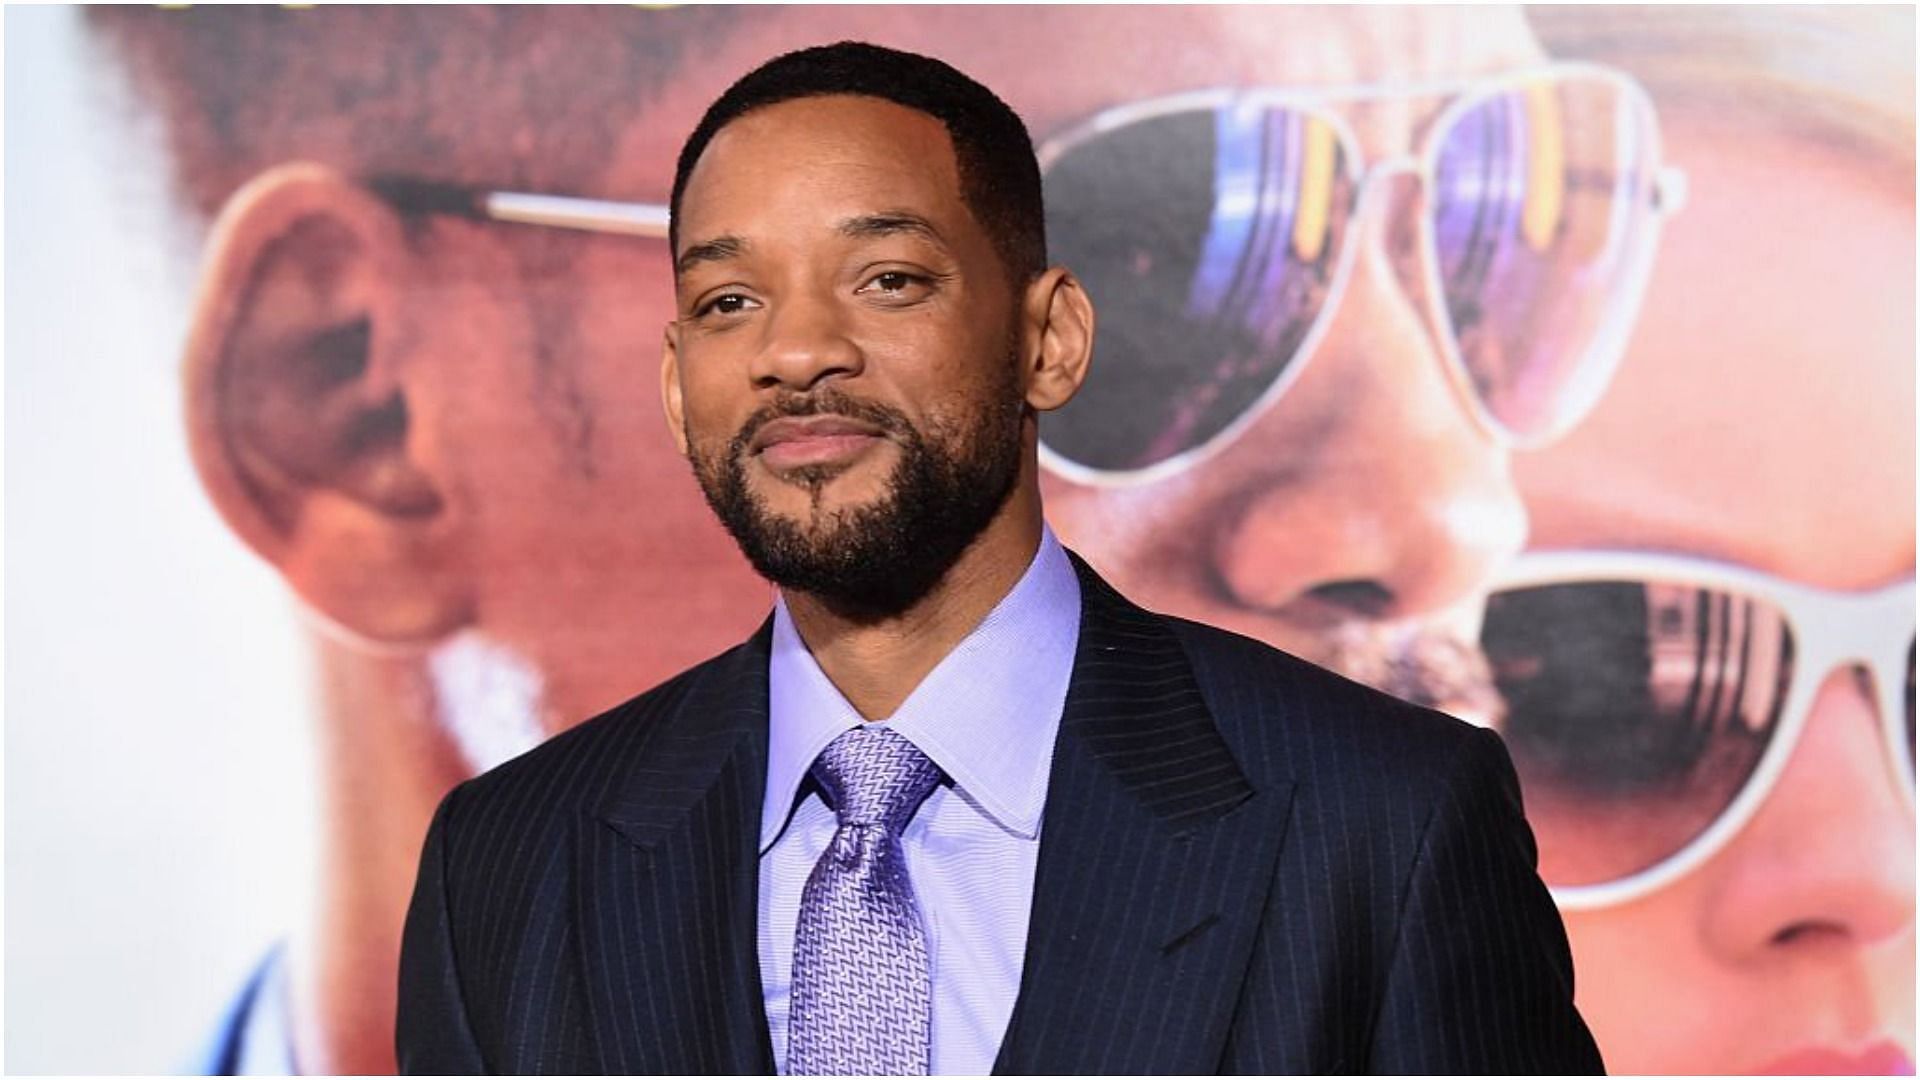 Will Smith has been barred from the Academy (Image via Jason Merritt/Getty Images)